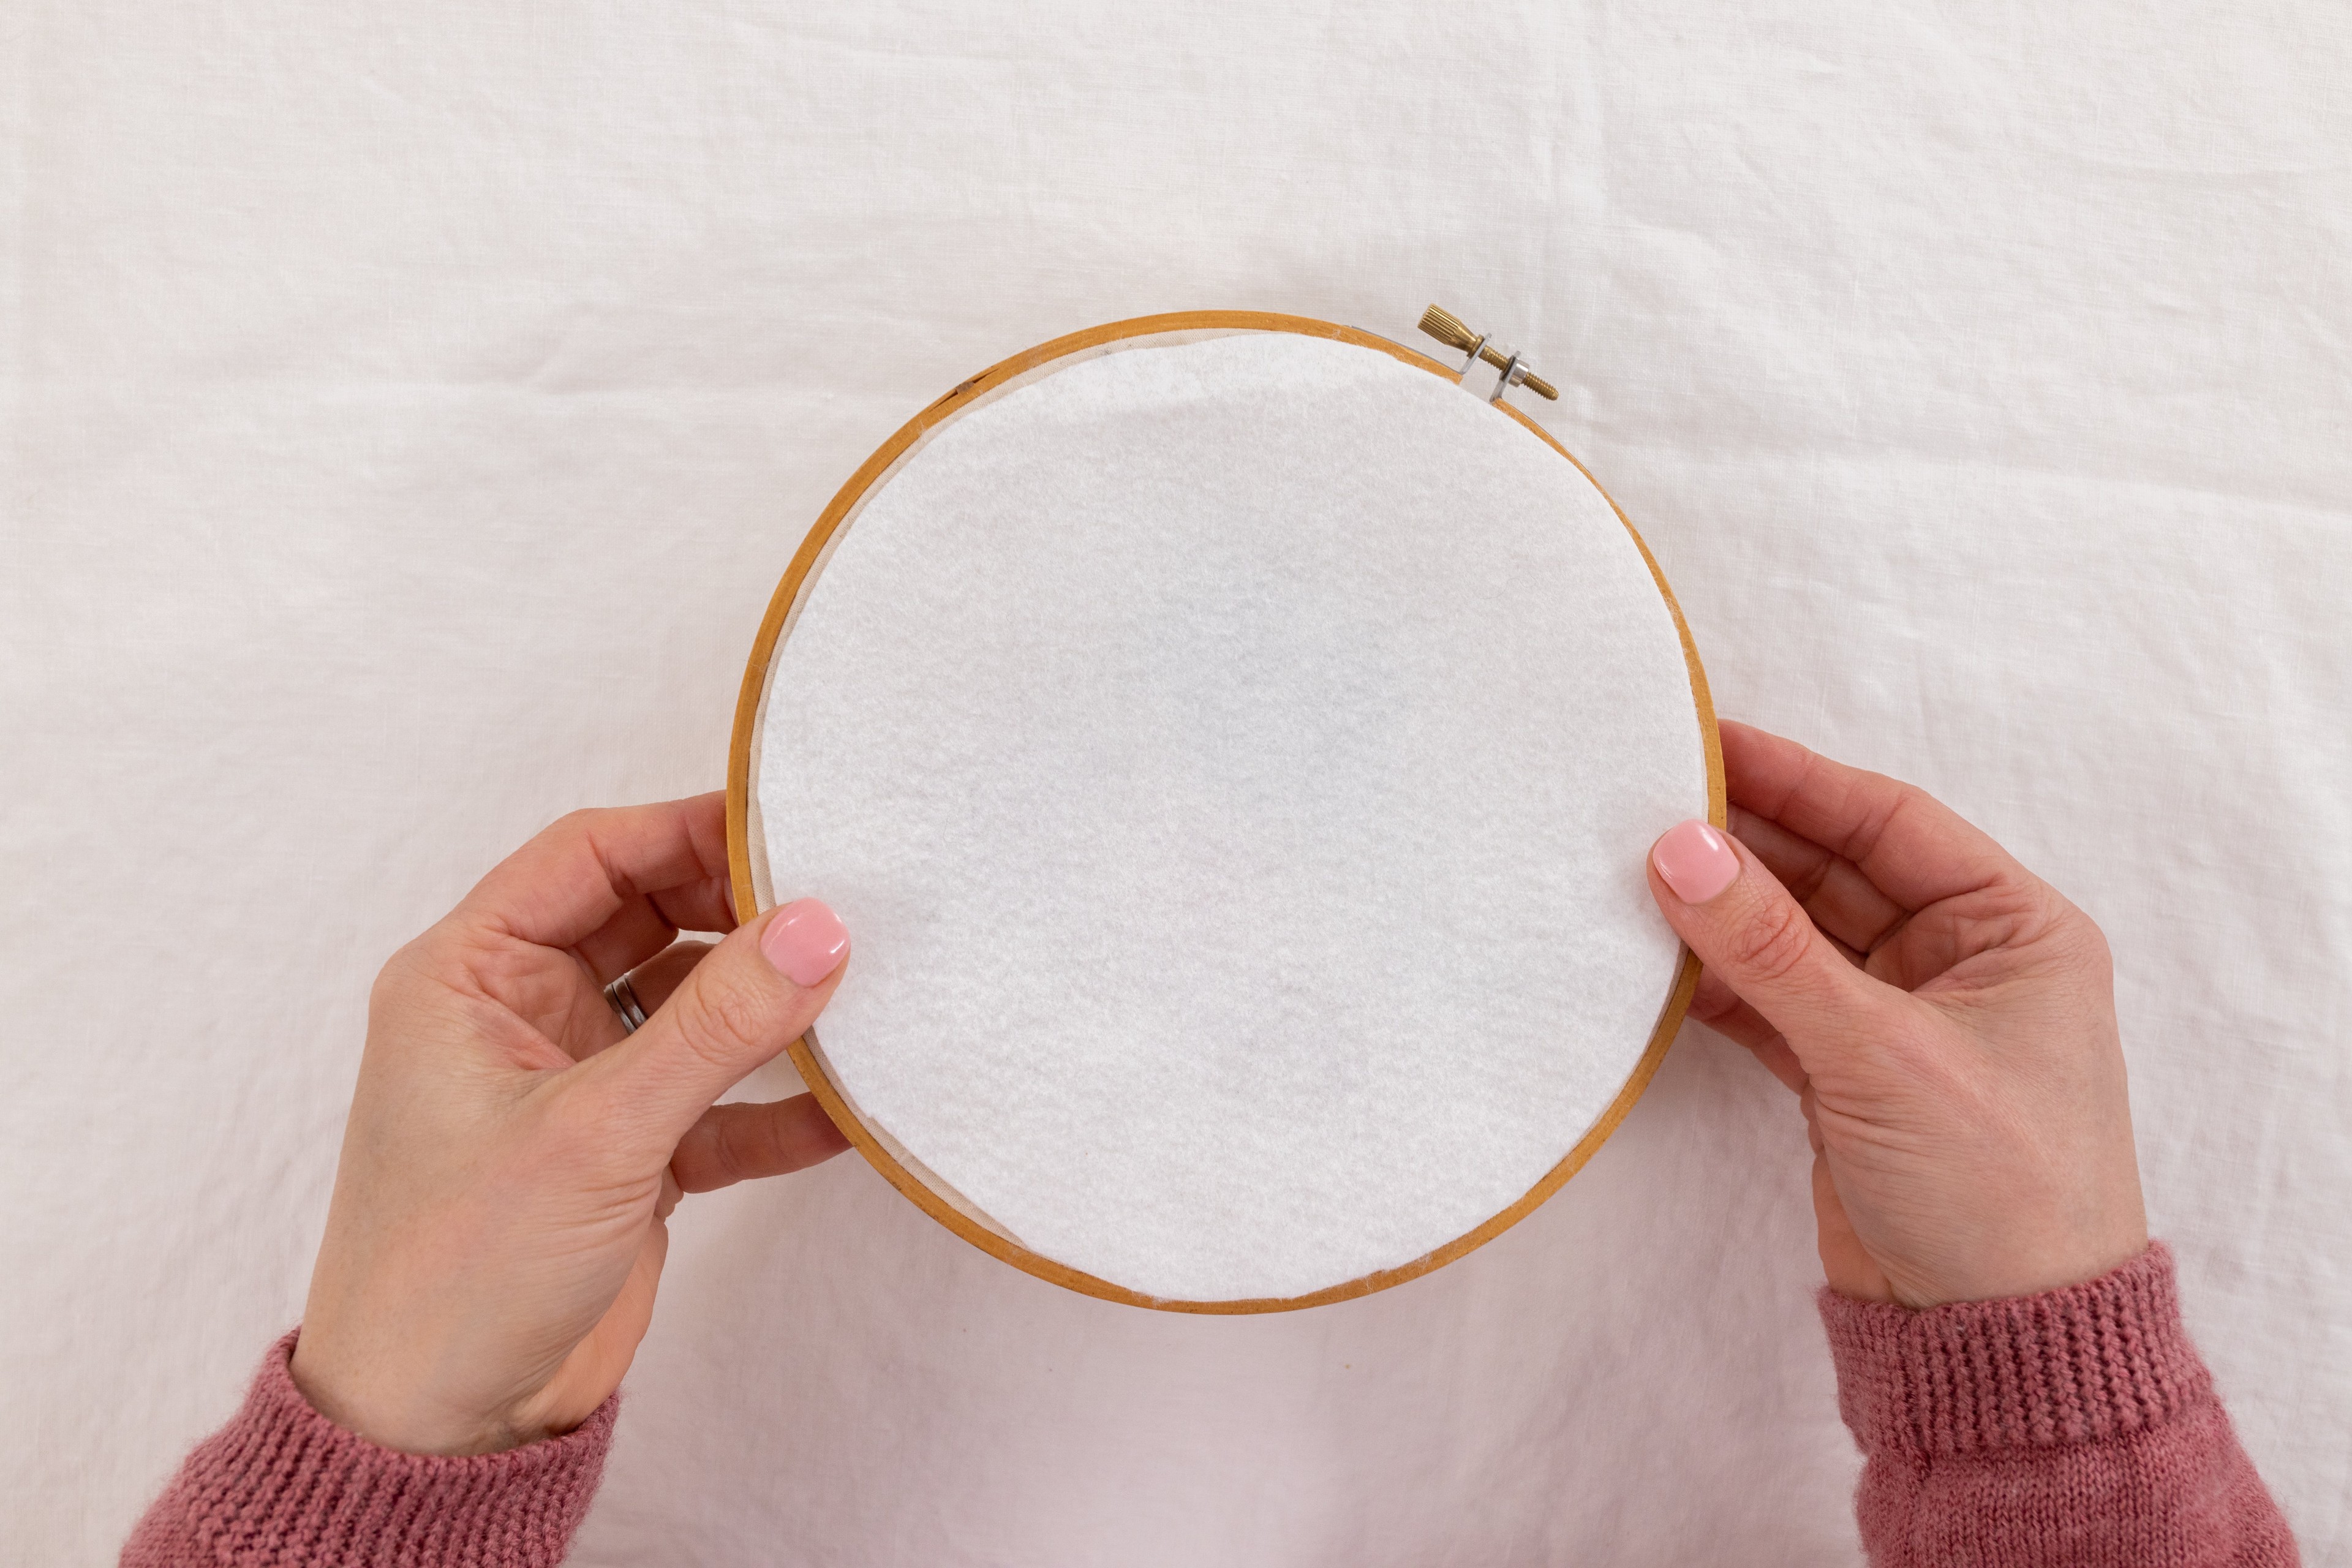 A hand holds a fabric backing over the back of the hoop.